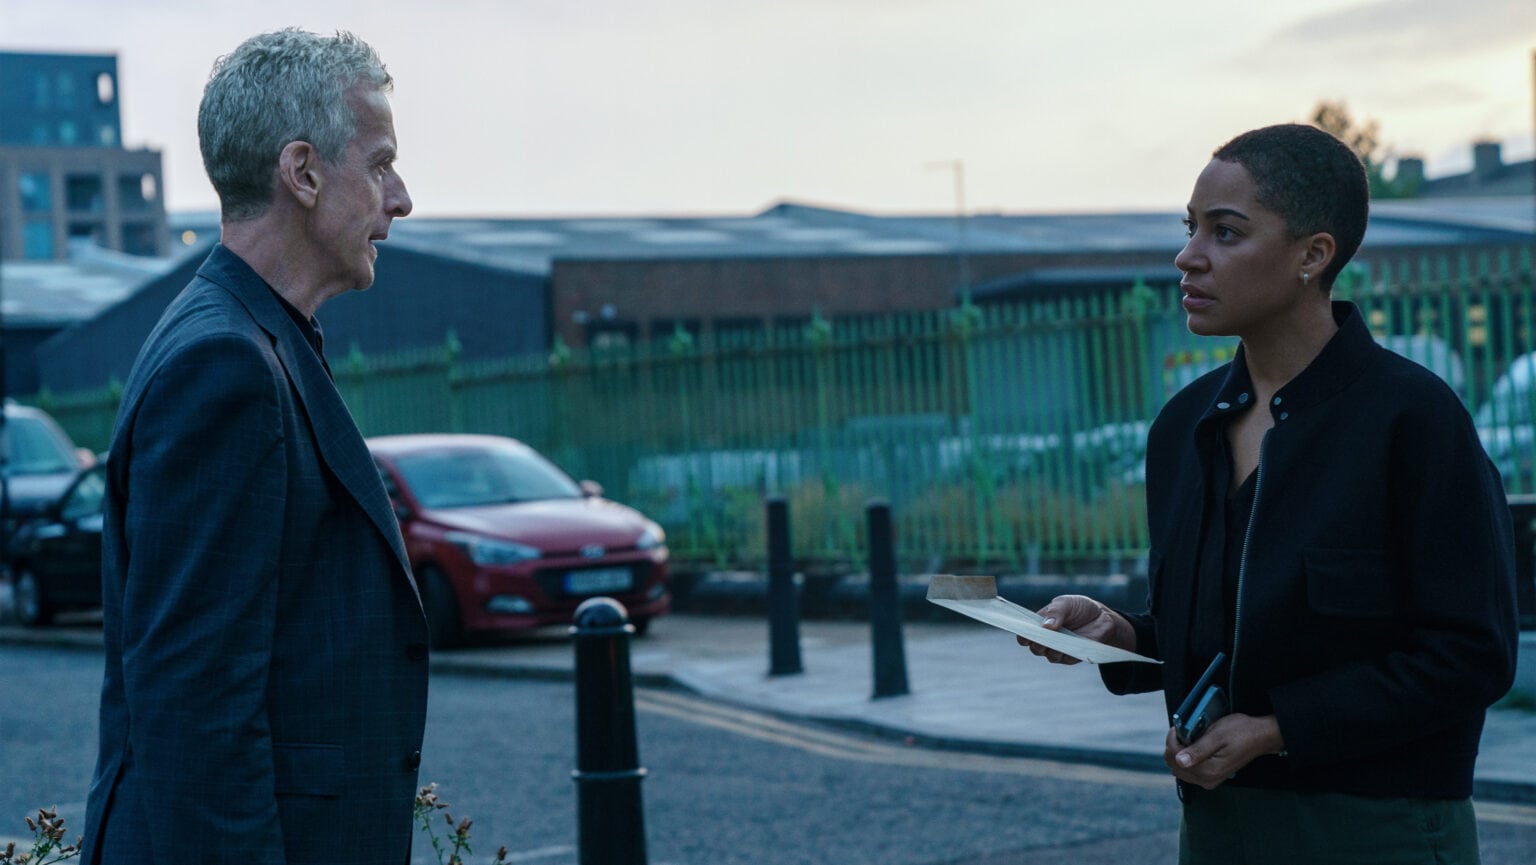 Academy Award winner Peter Capaldi and Cush Jumbo star in “Criminal Record,” premiering with the first two episodes on January 12 on Apple TV+.